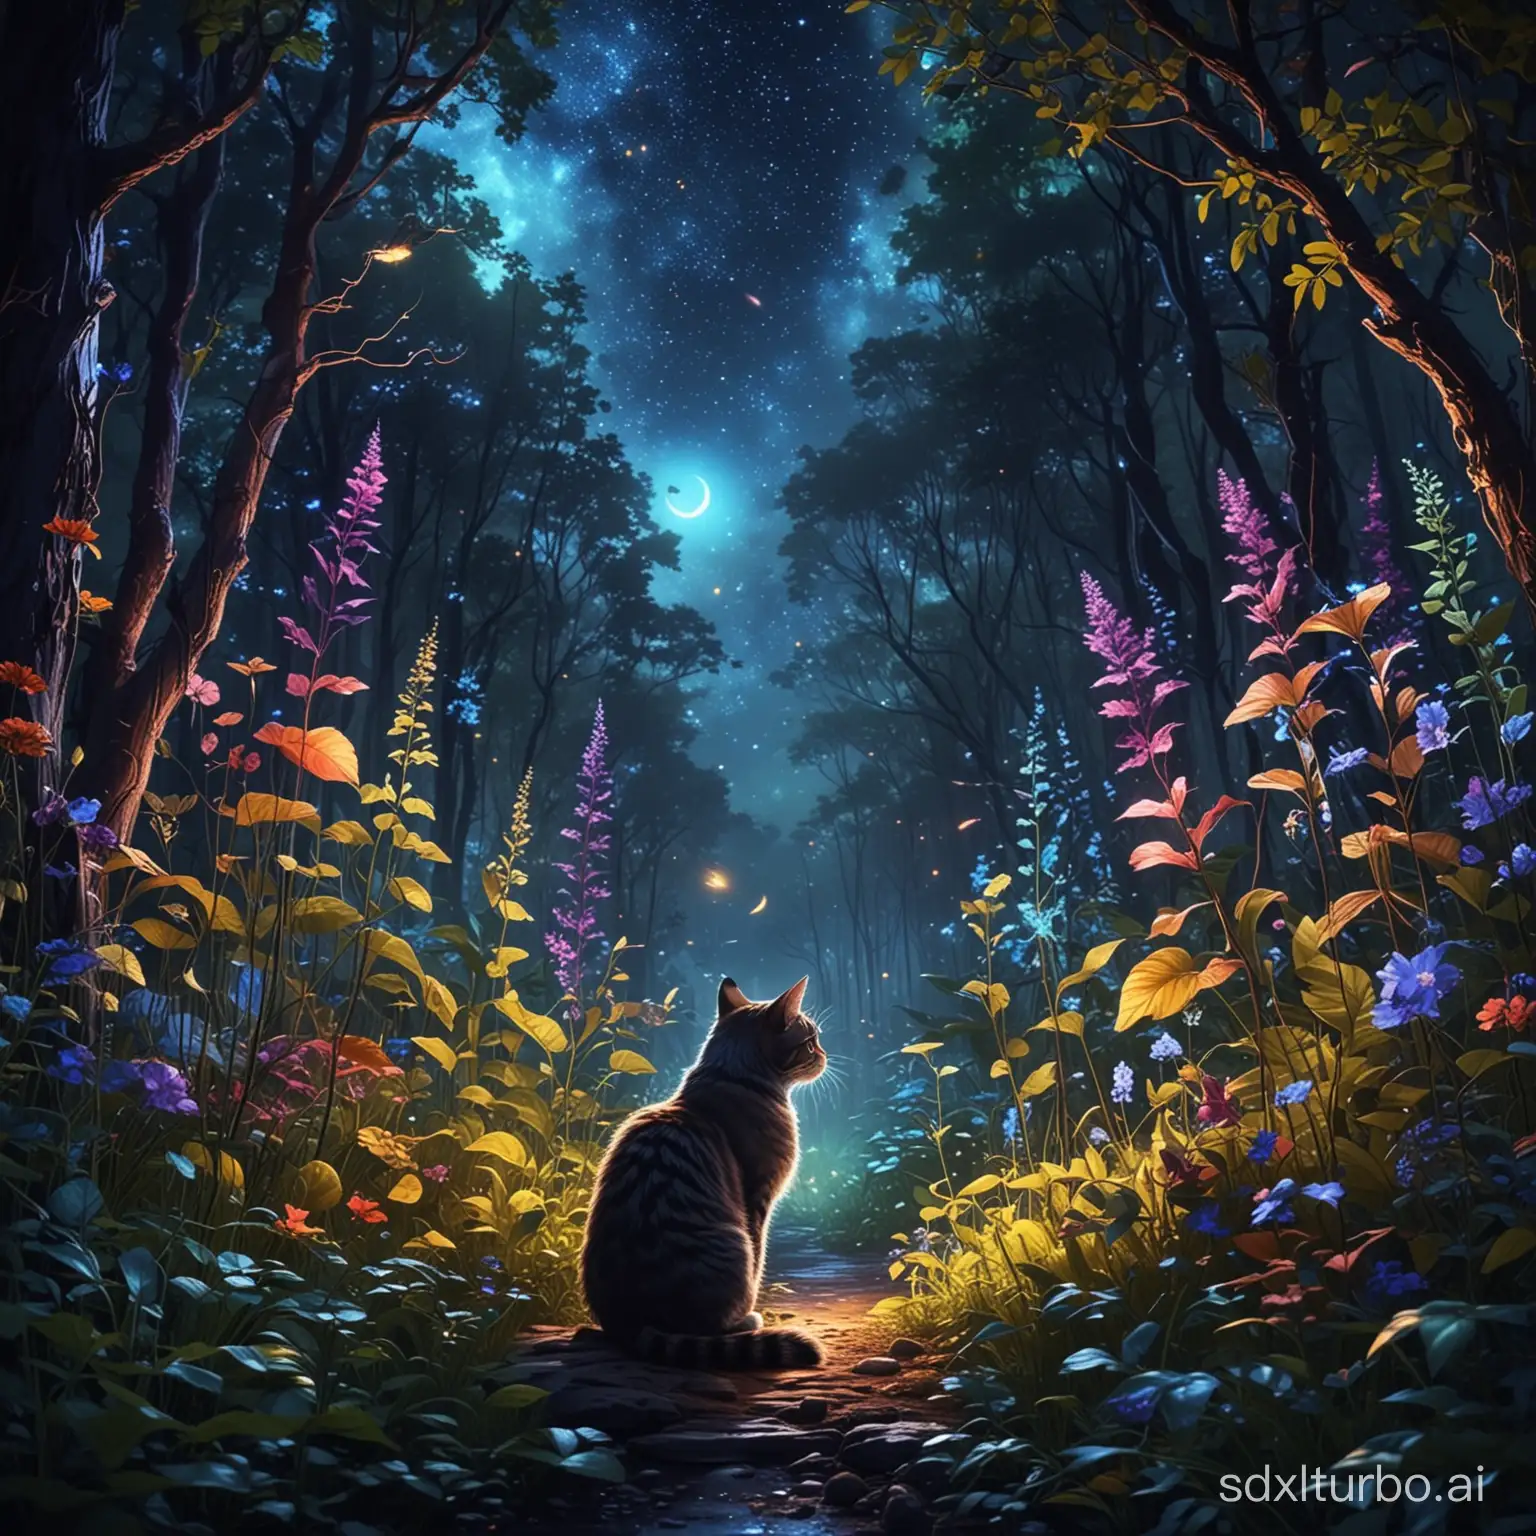 There are all kinds of plants and cats in the forest. Mysterious light, night sky, glowing plants, breeze blowing. Fantasy style, bright colors